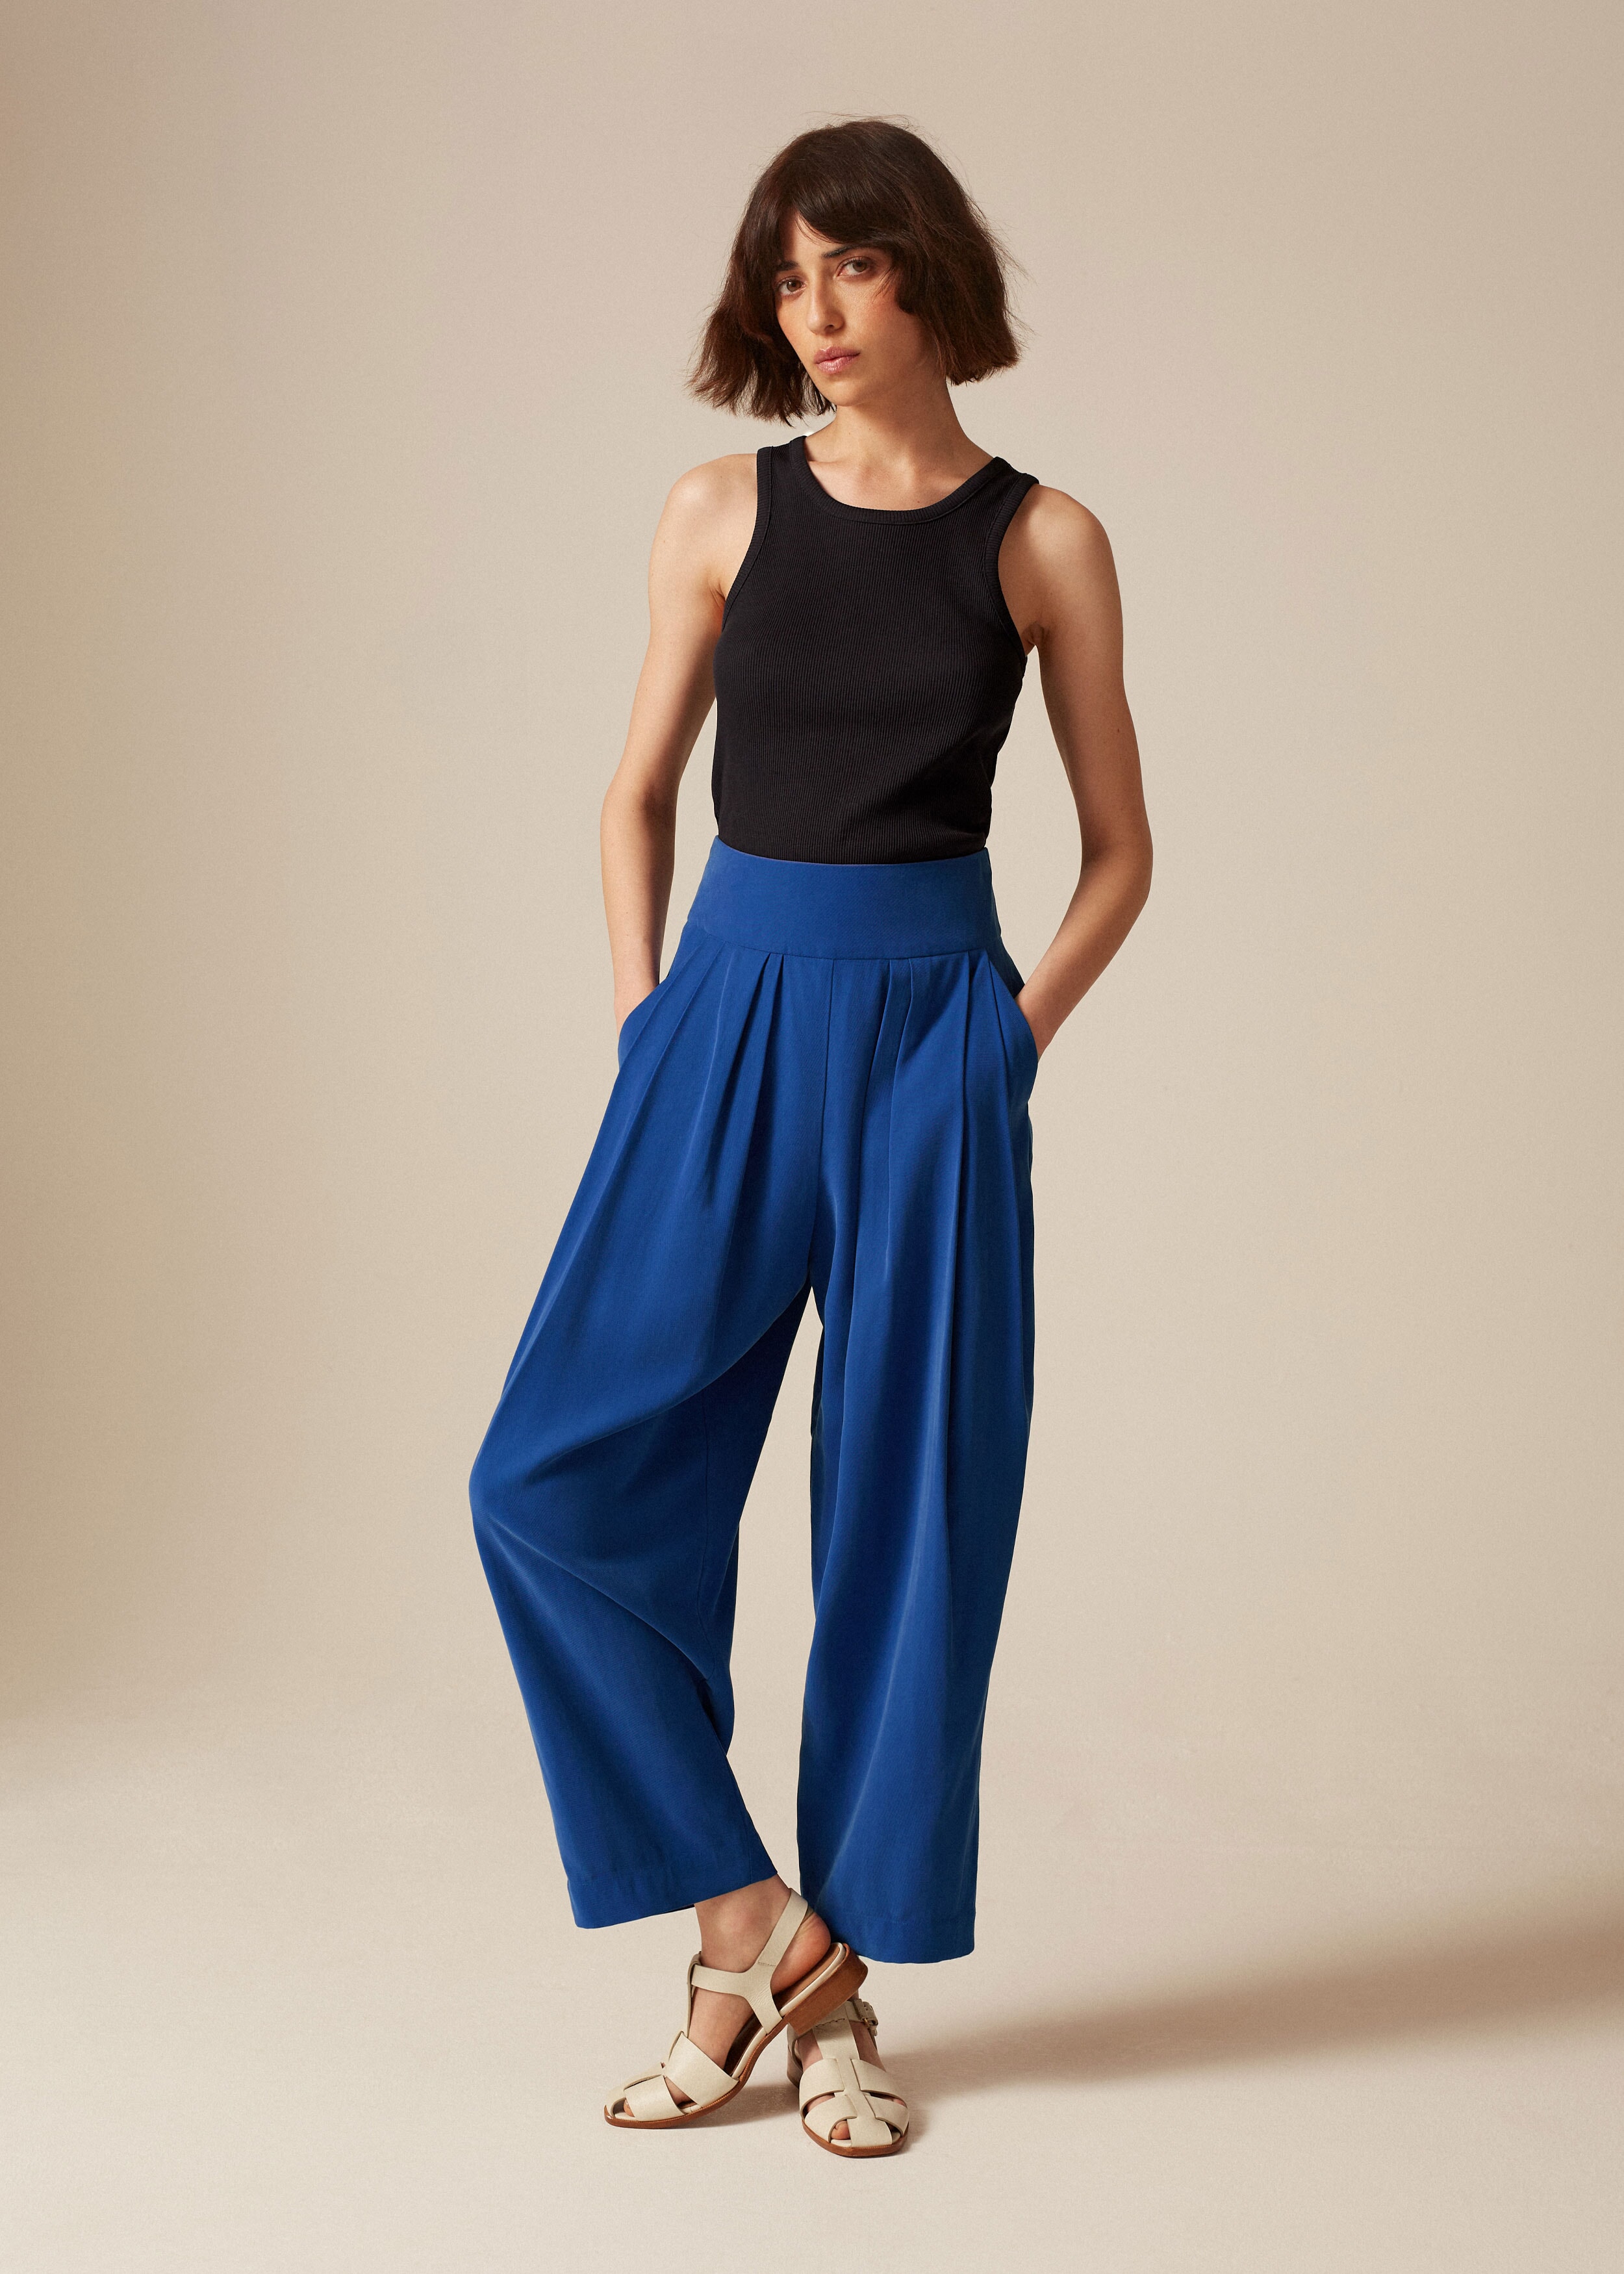 Buy Soft Linen Trousers, Women High Waisted Linen Pants, Tapered Pants  Online in India - Etsy